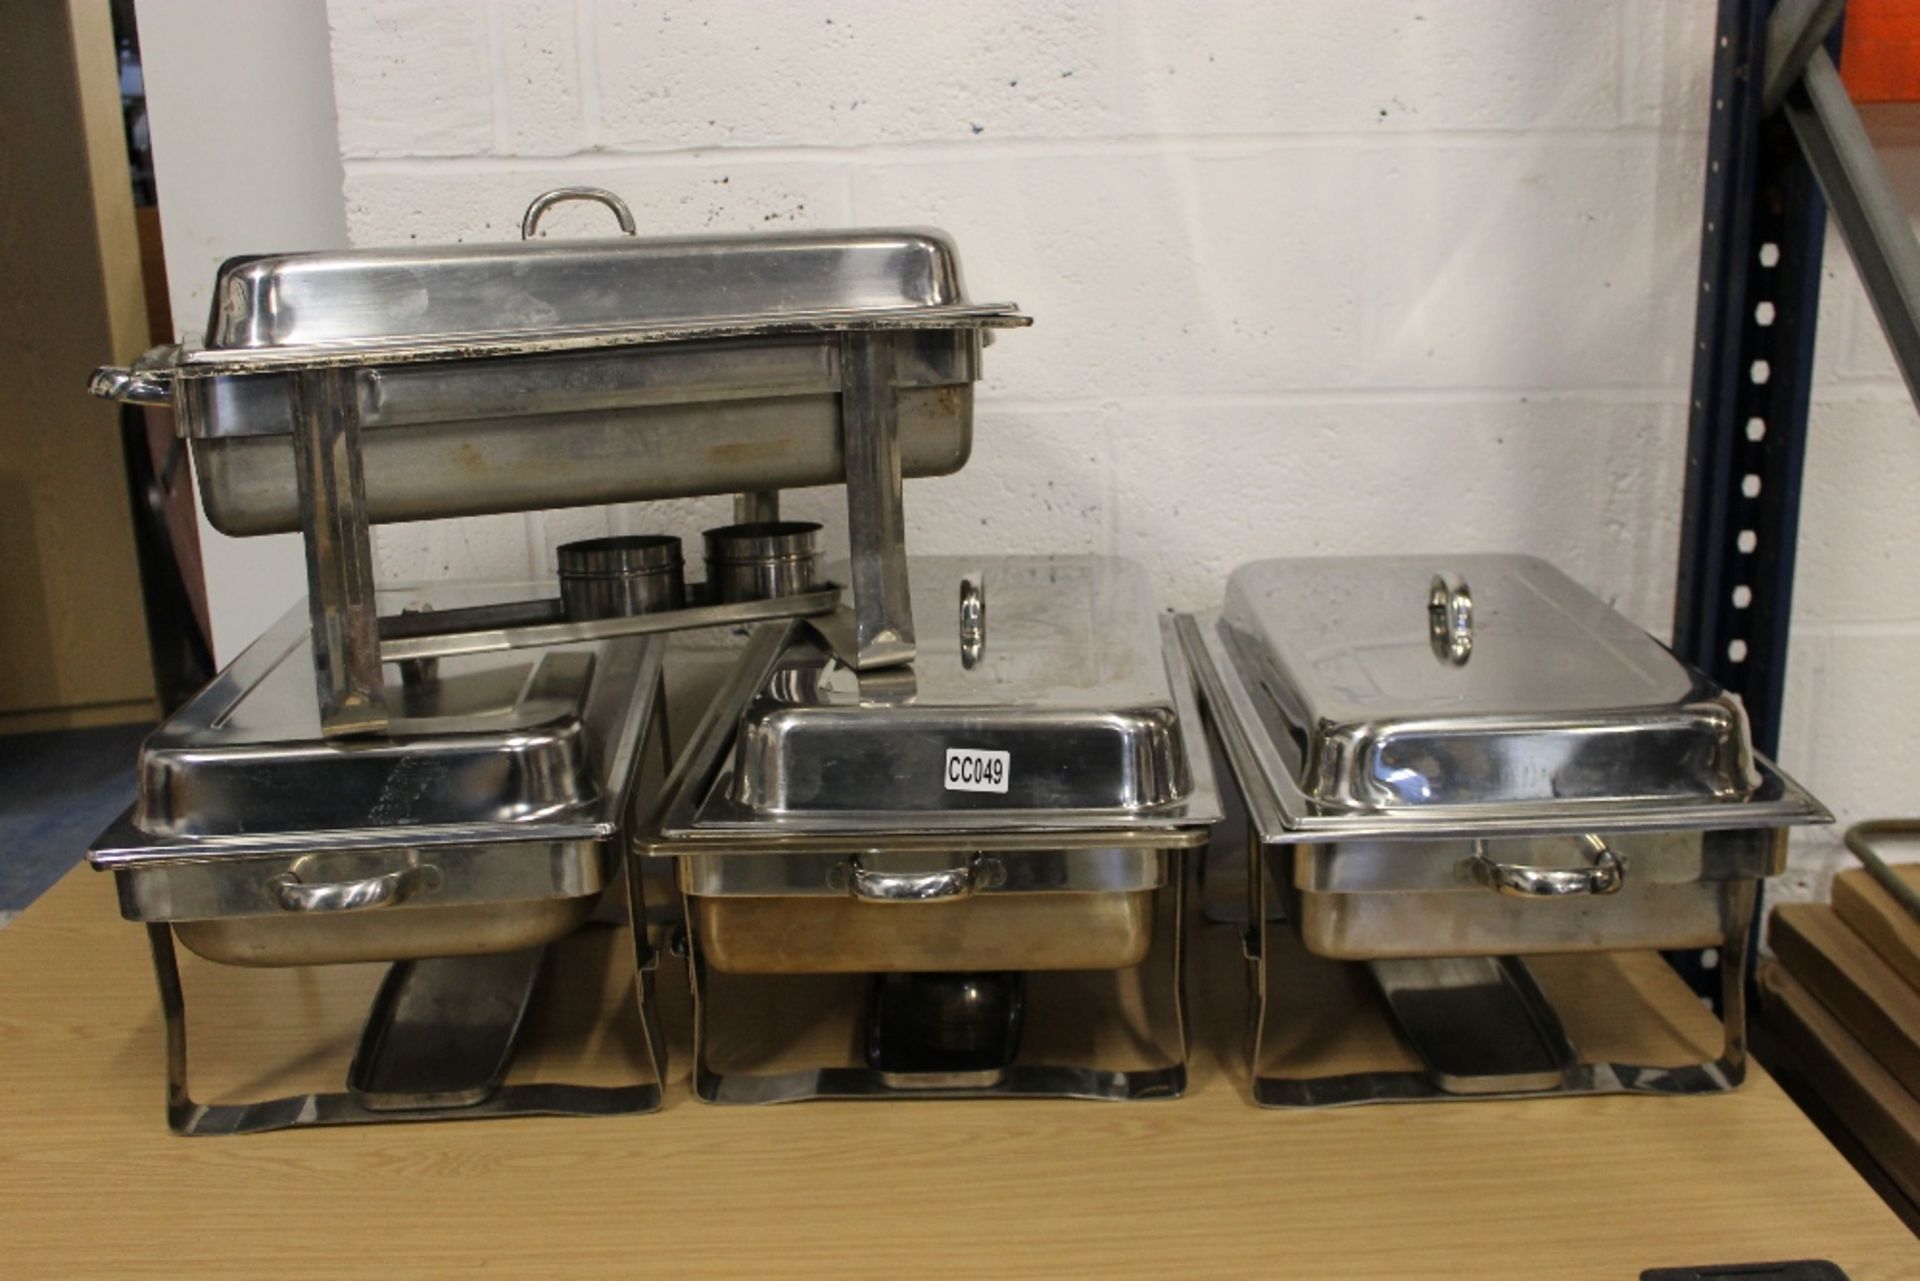 4 x Large Chafing Dishes